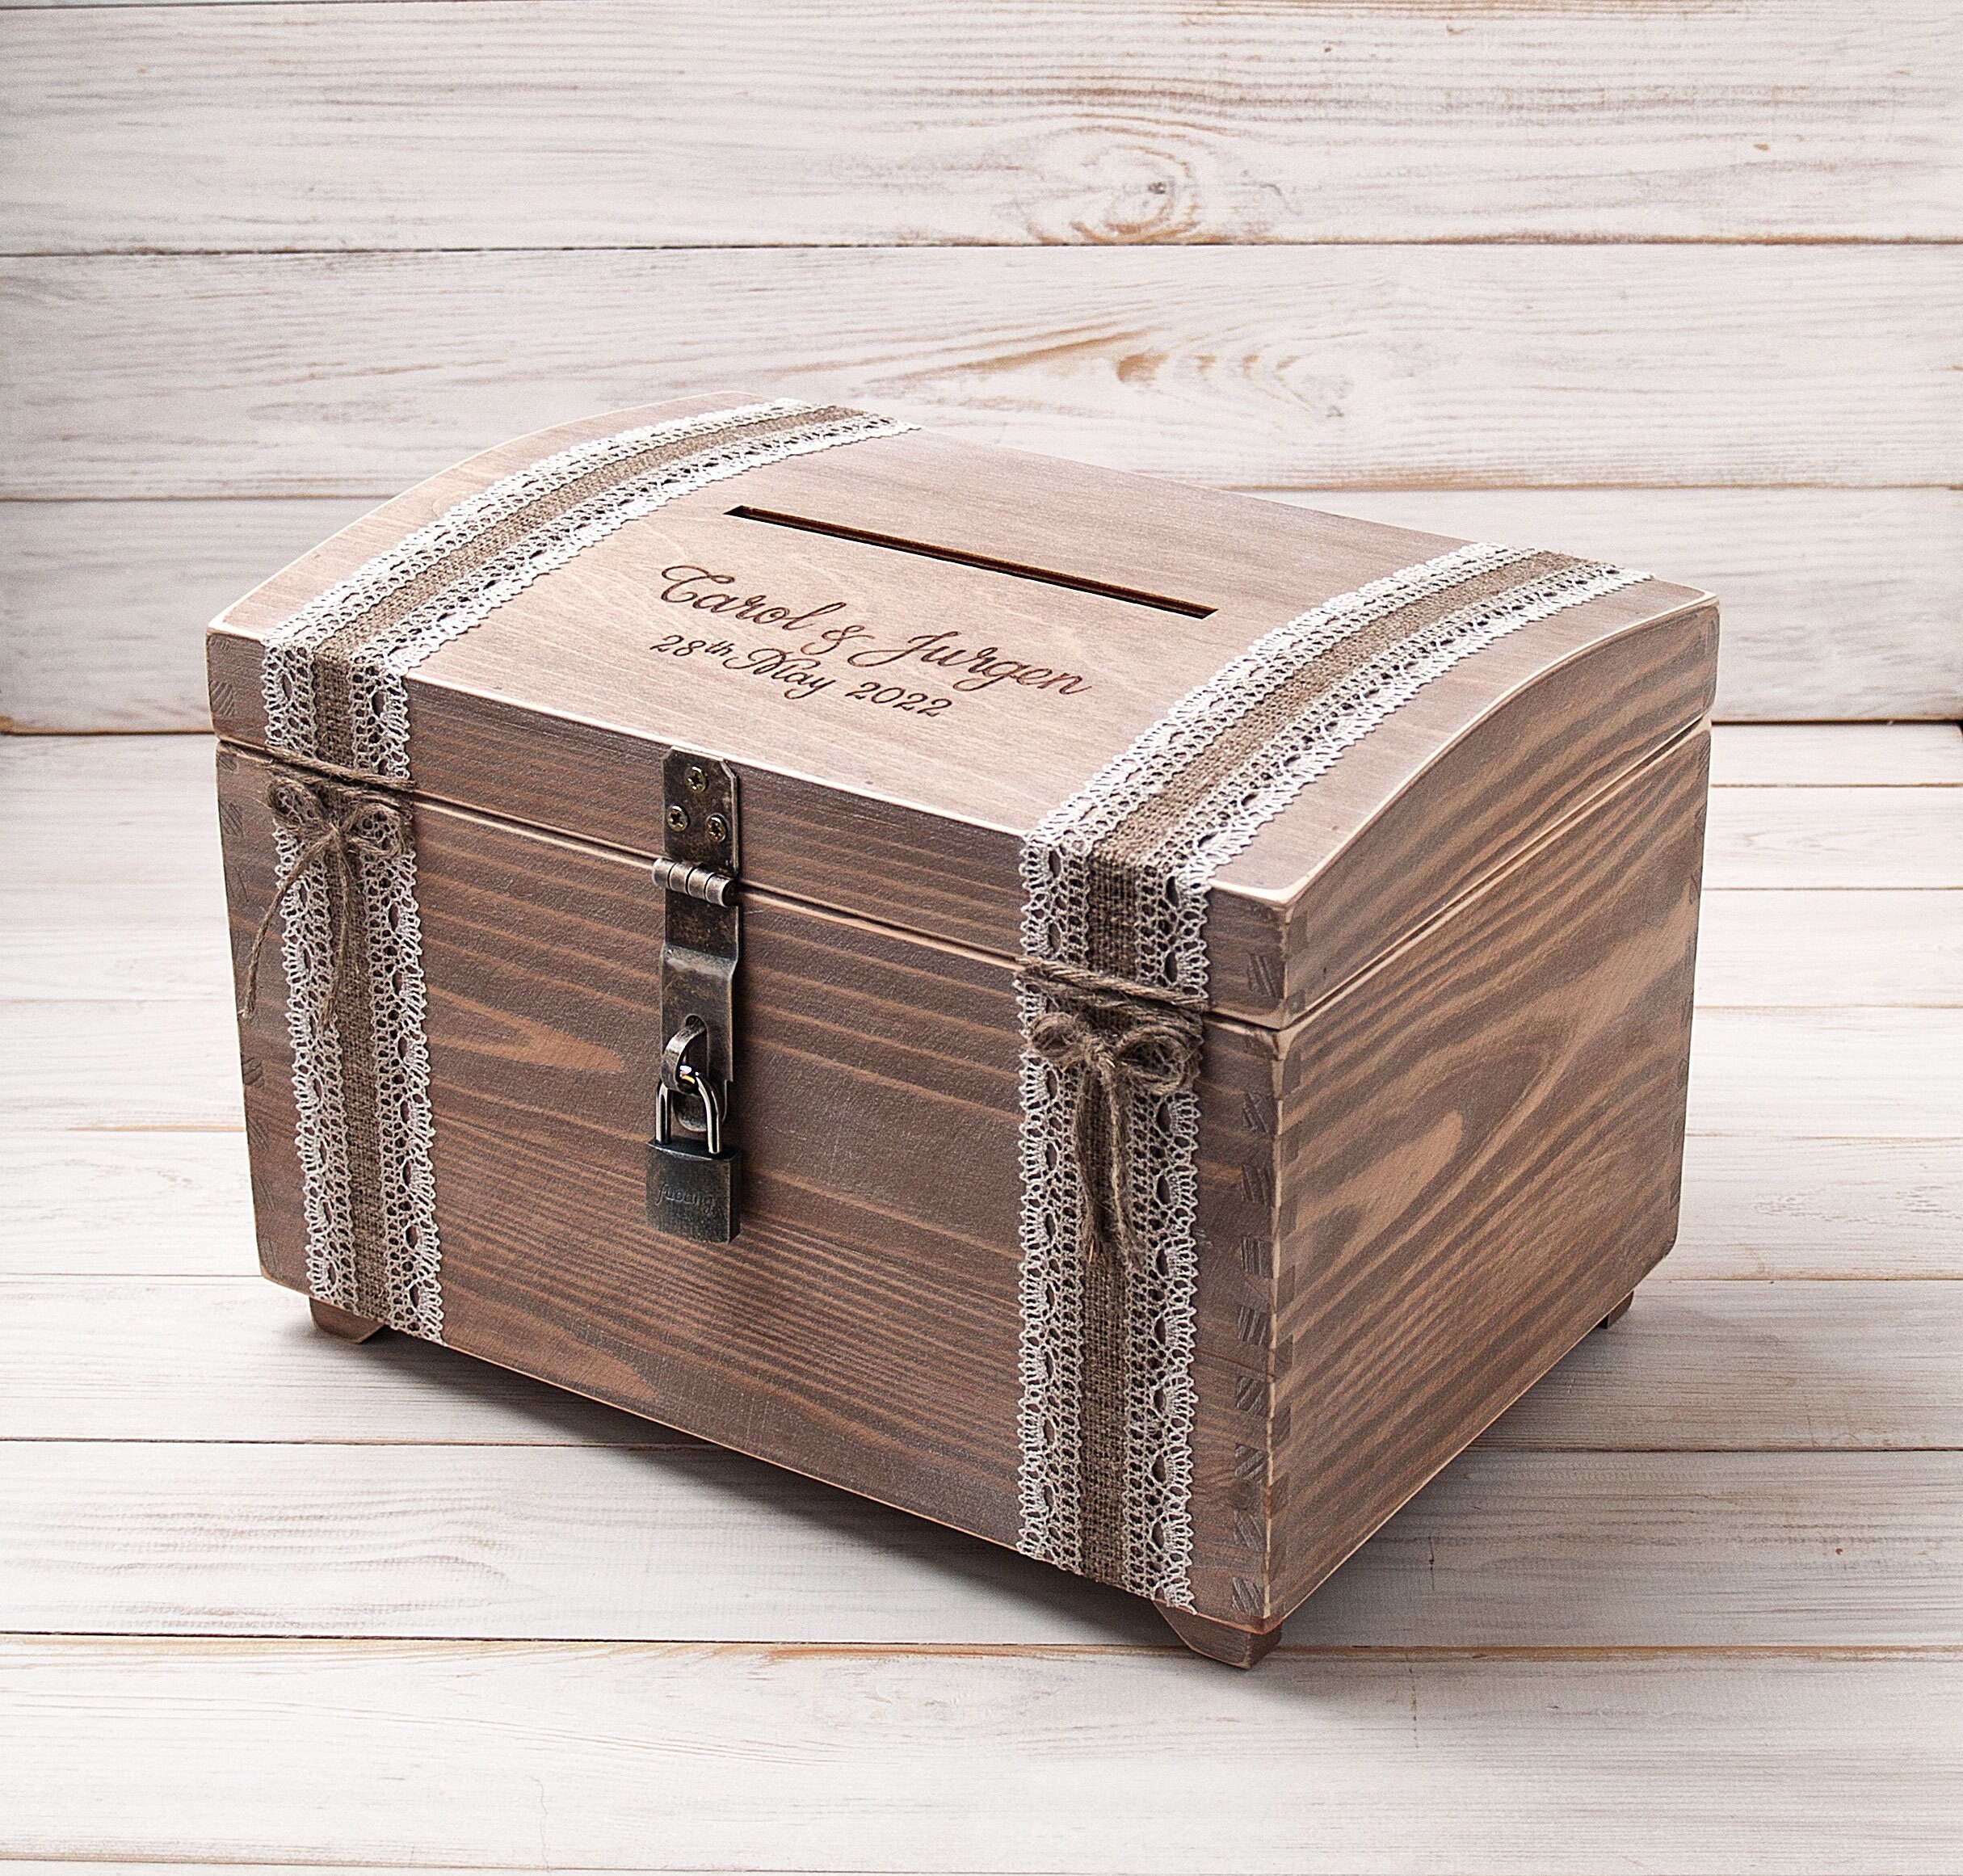  Rustic Wedding Card Box with Slot, Personalized Large Wooden  Card Box with Burlap and Lace, Cards Banner Gift Box, Wooden Chest Memory  Box with Lock Key : Handmade Products